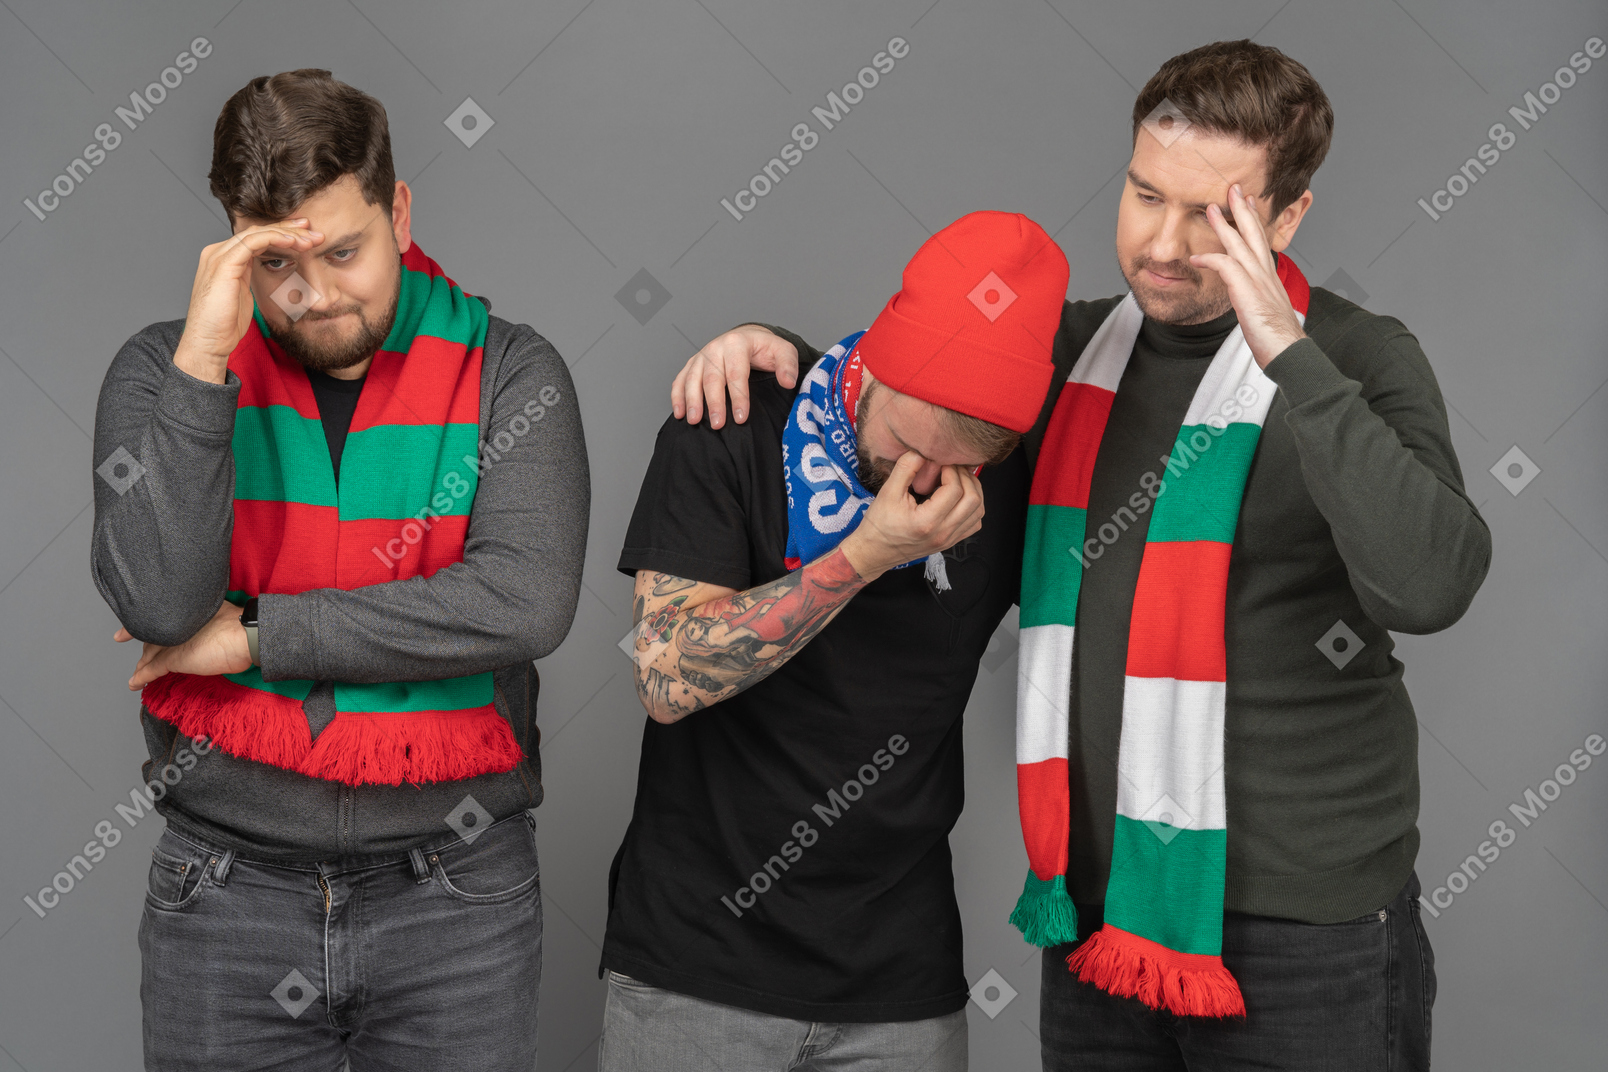 Front view of three sad male football fans touching head